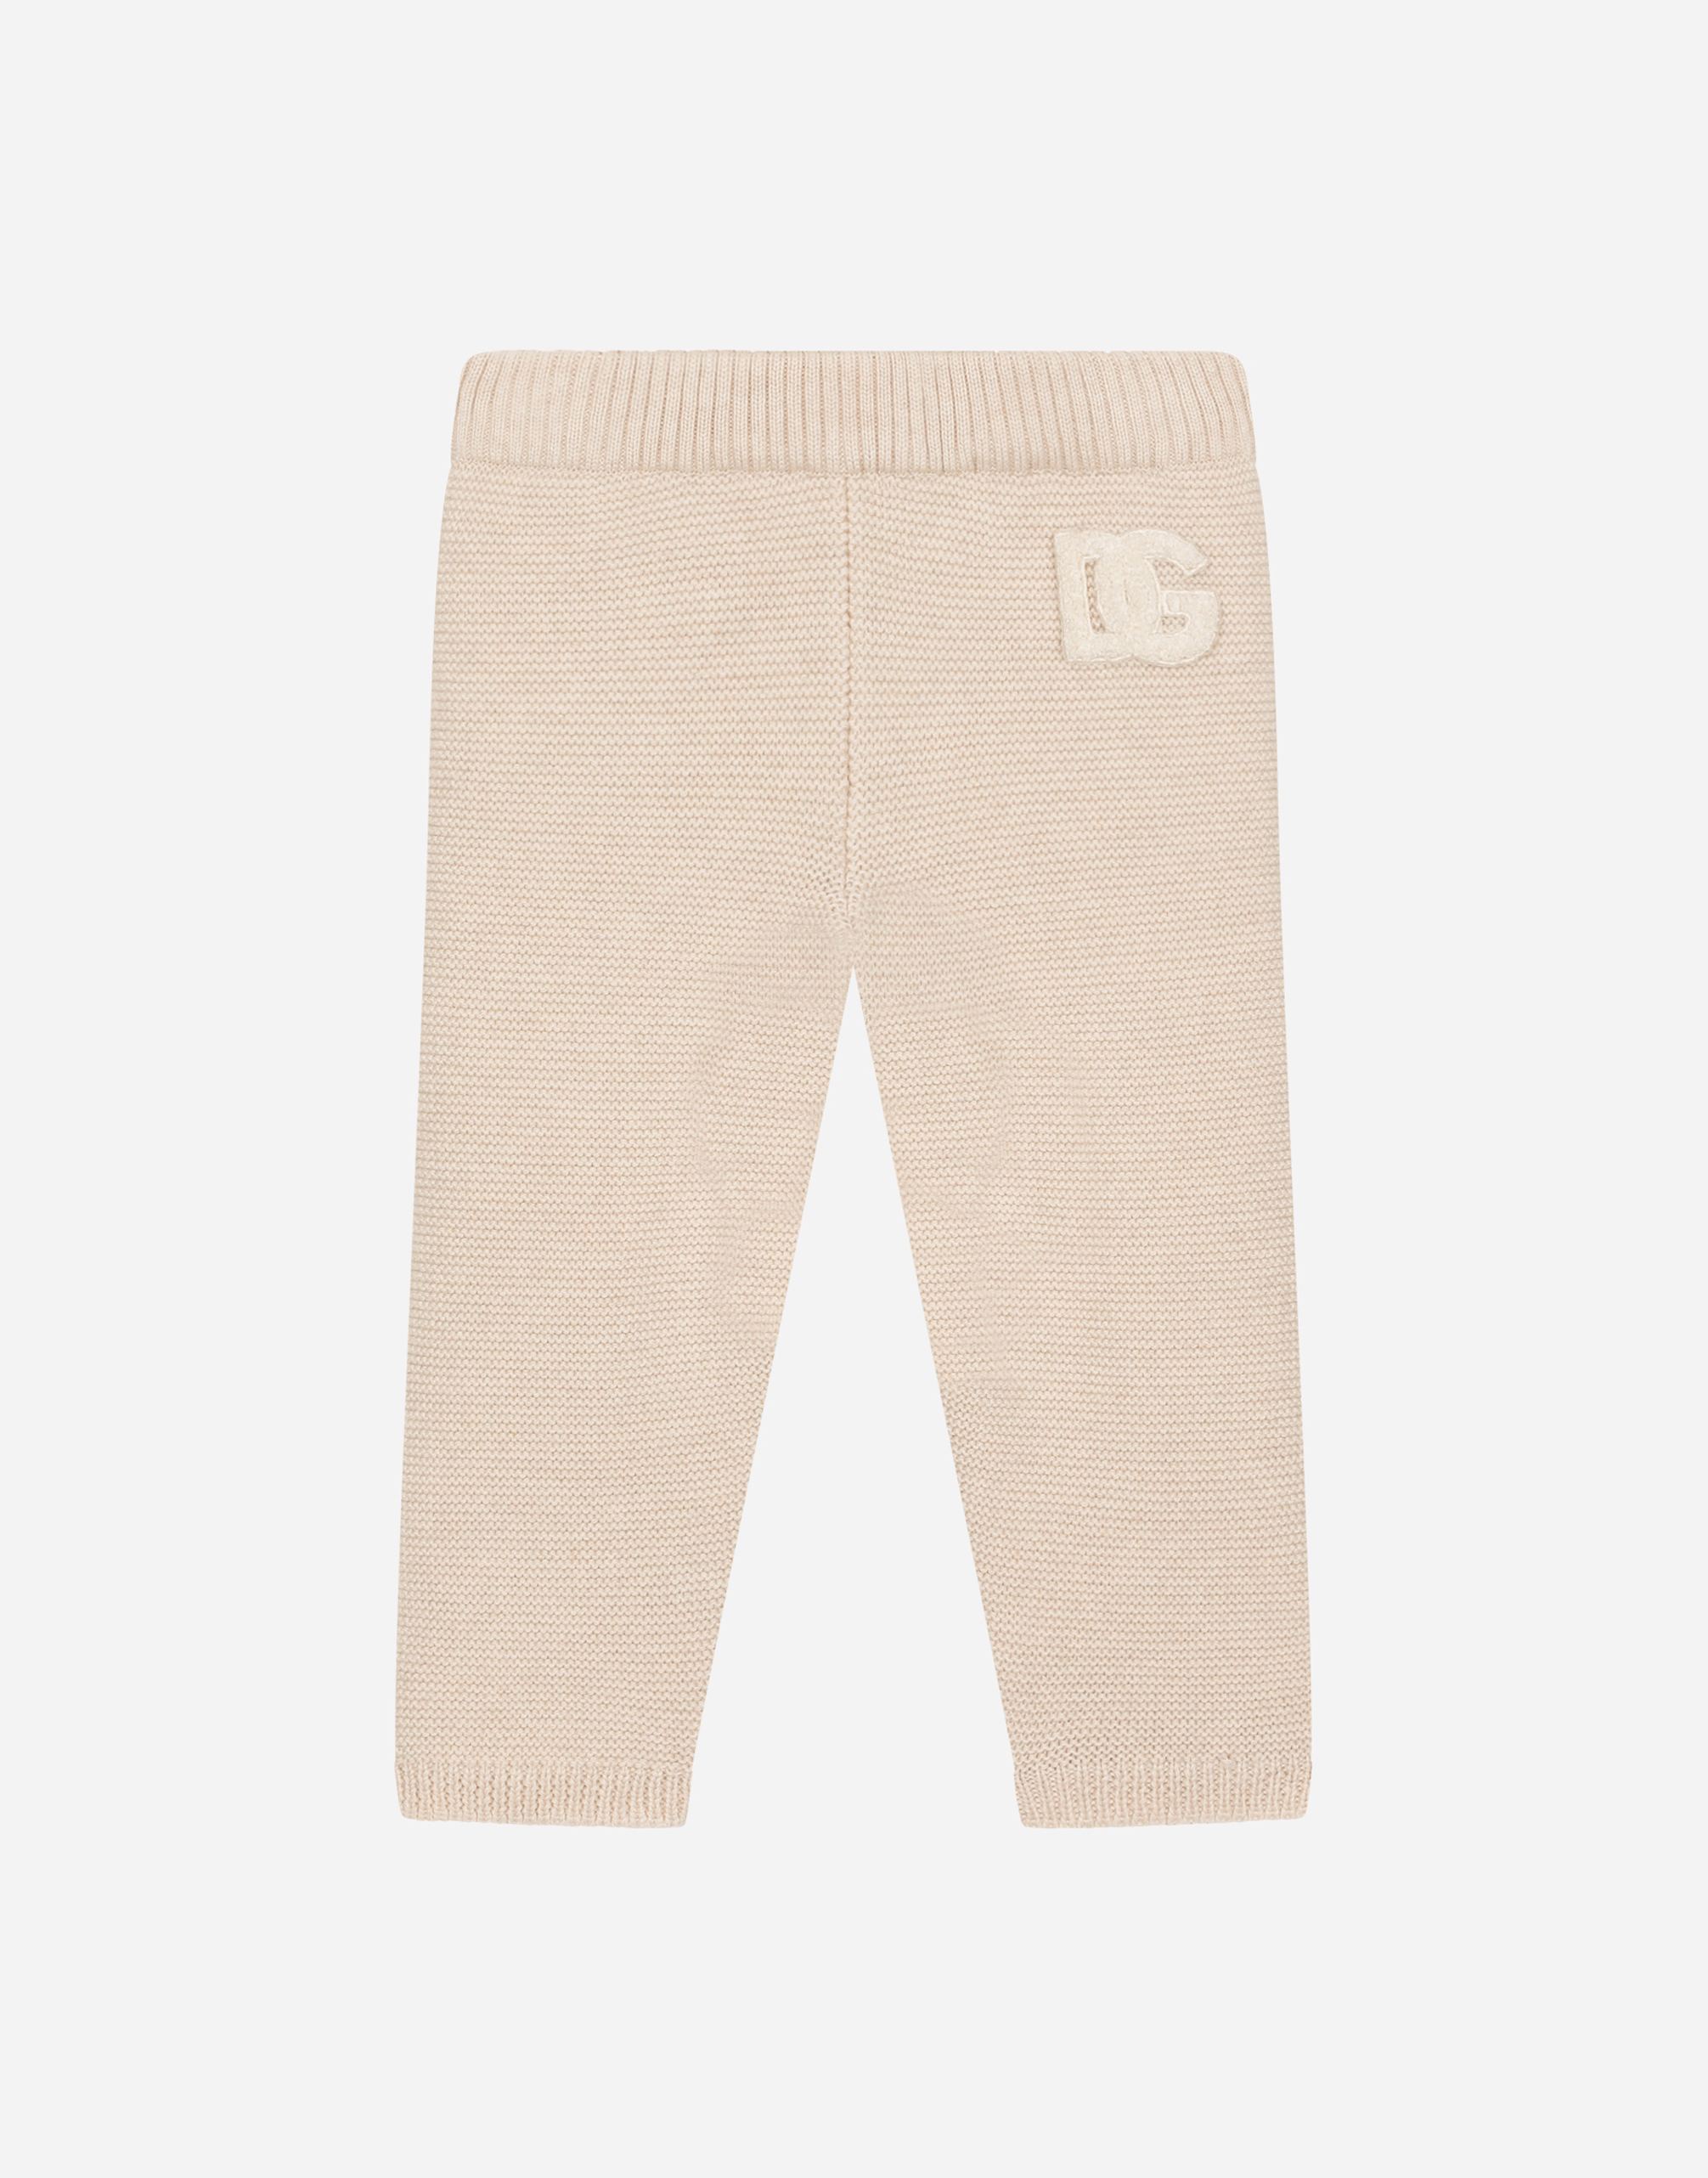 Knit pants with DG logo patch in Beige